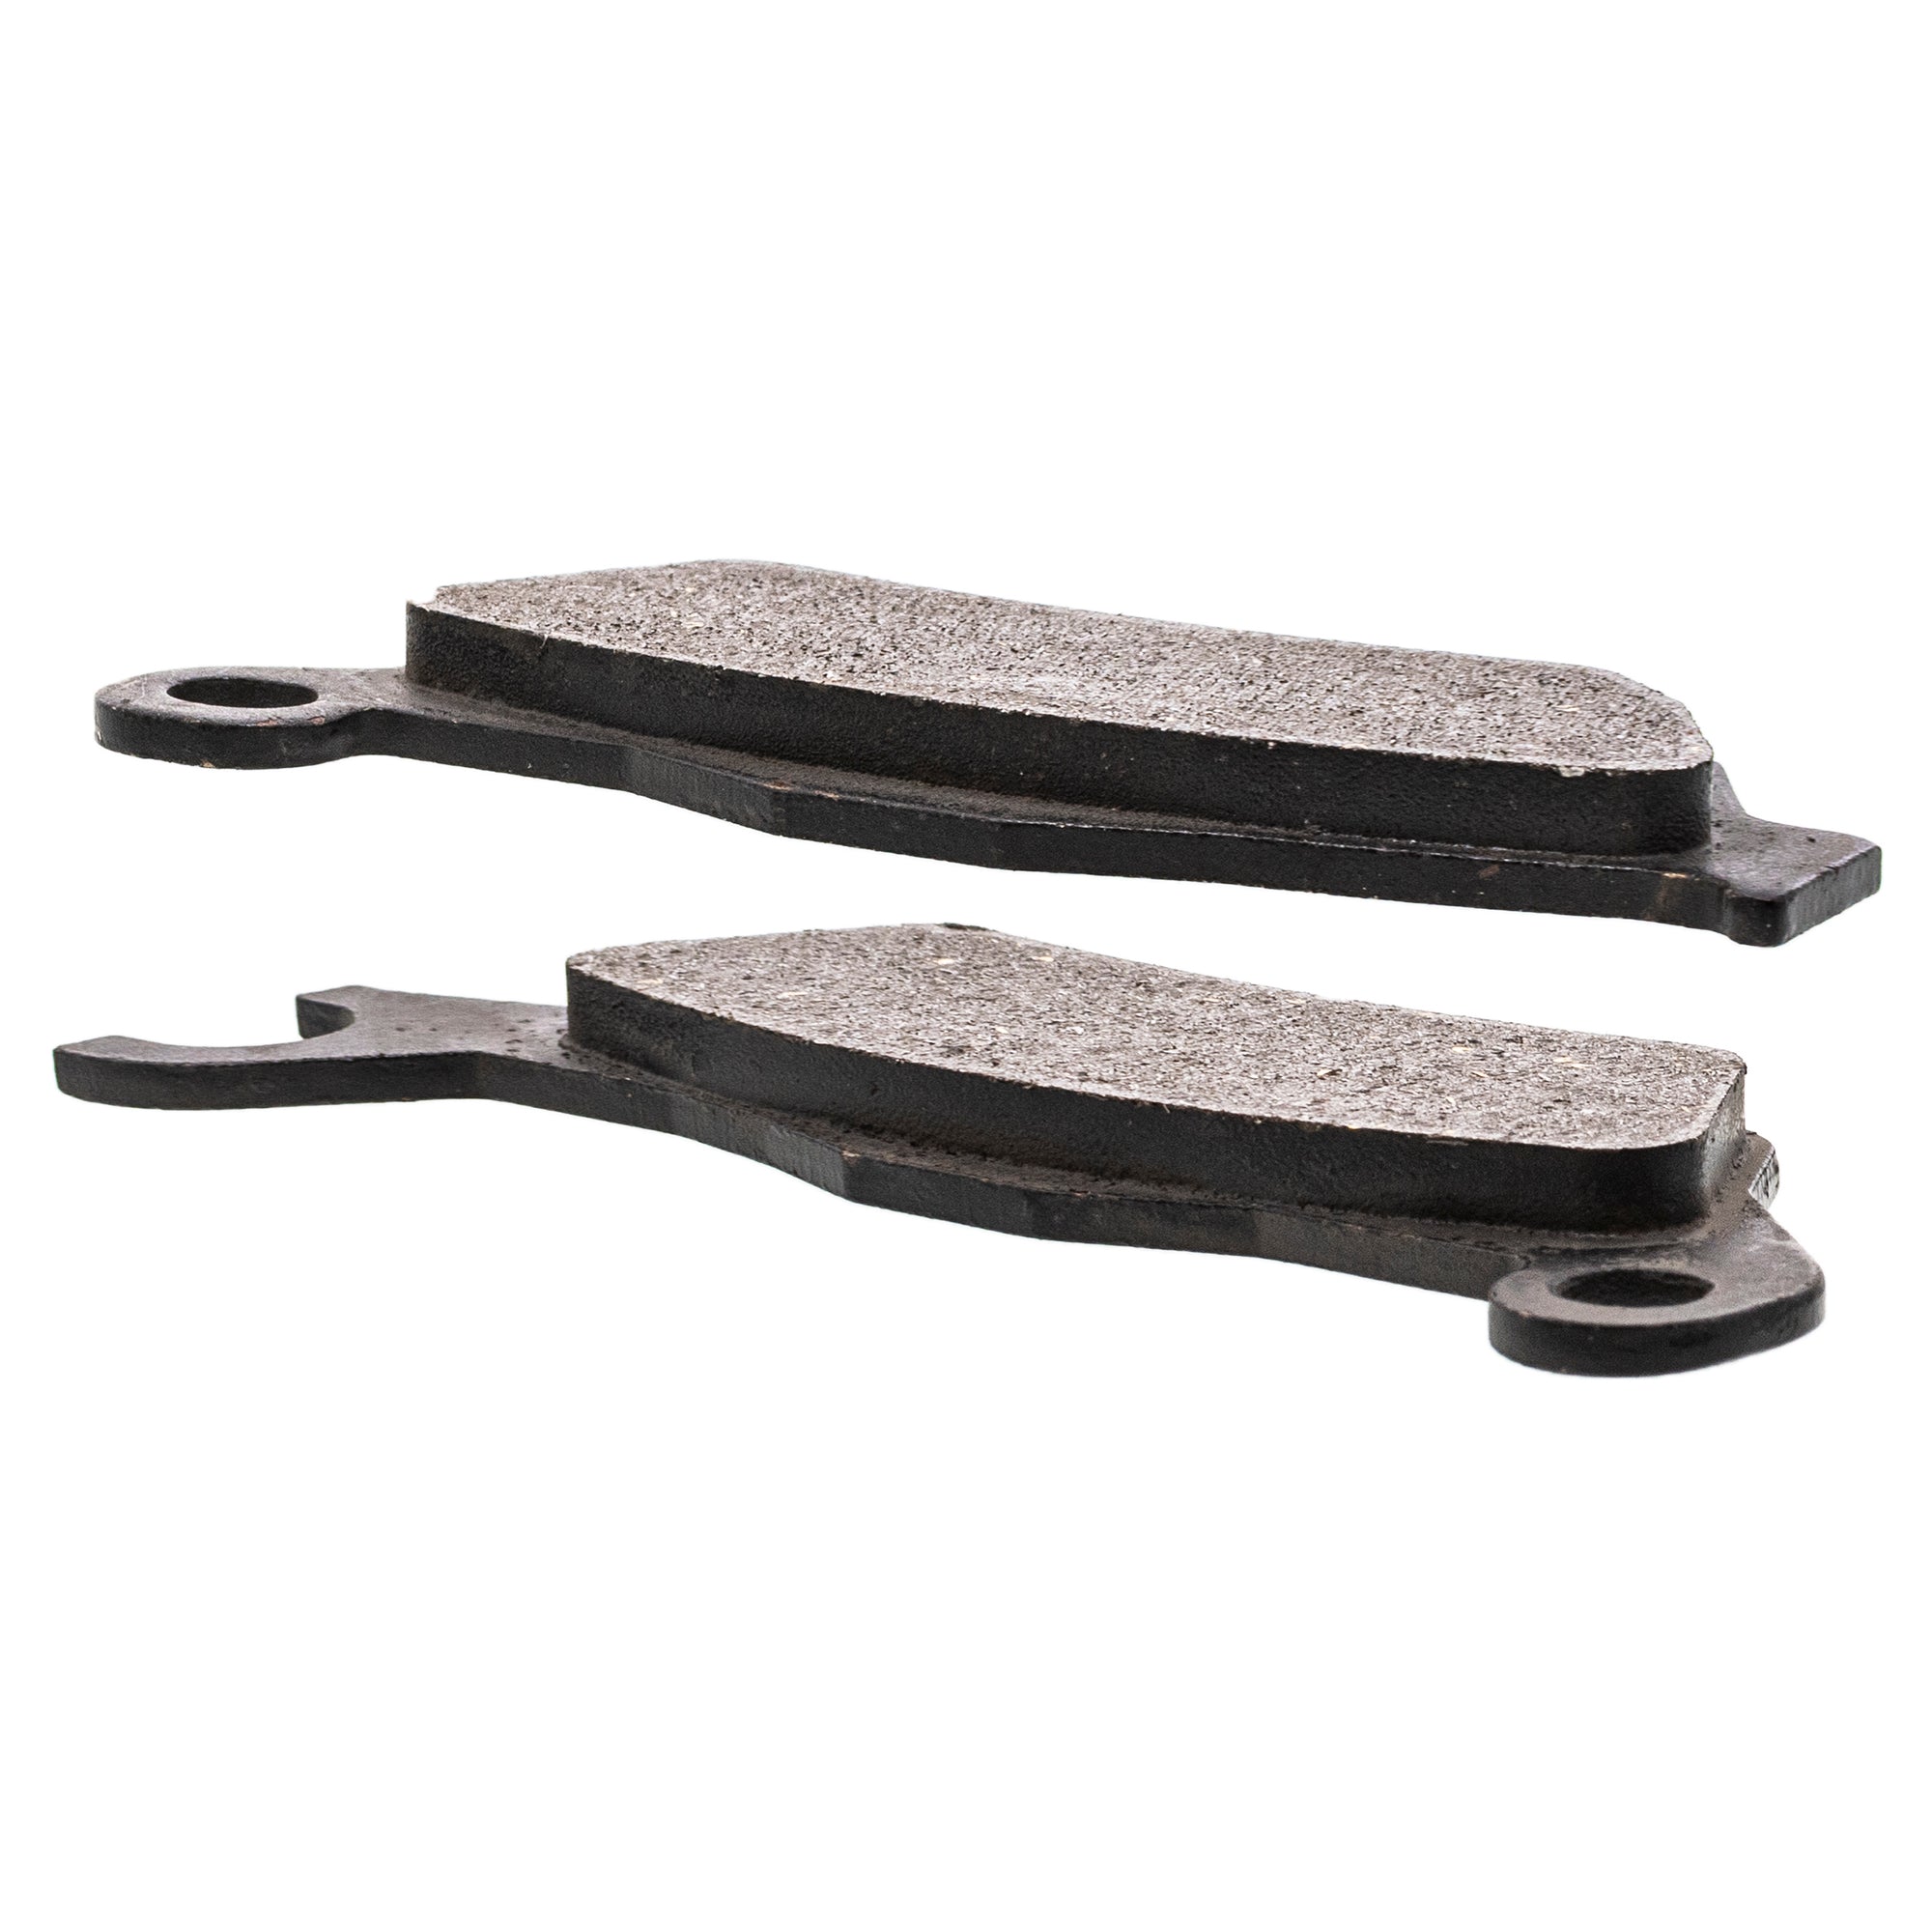 Brake Pad Kit for Can-Am Renegade Outlander L Max Front Rear